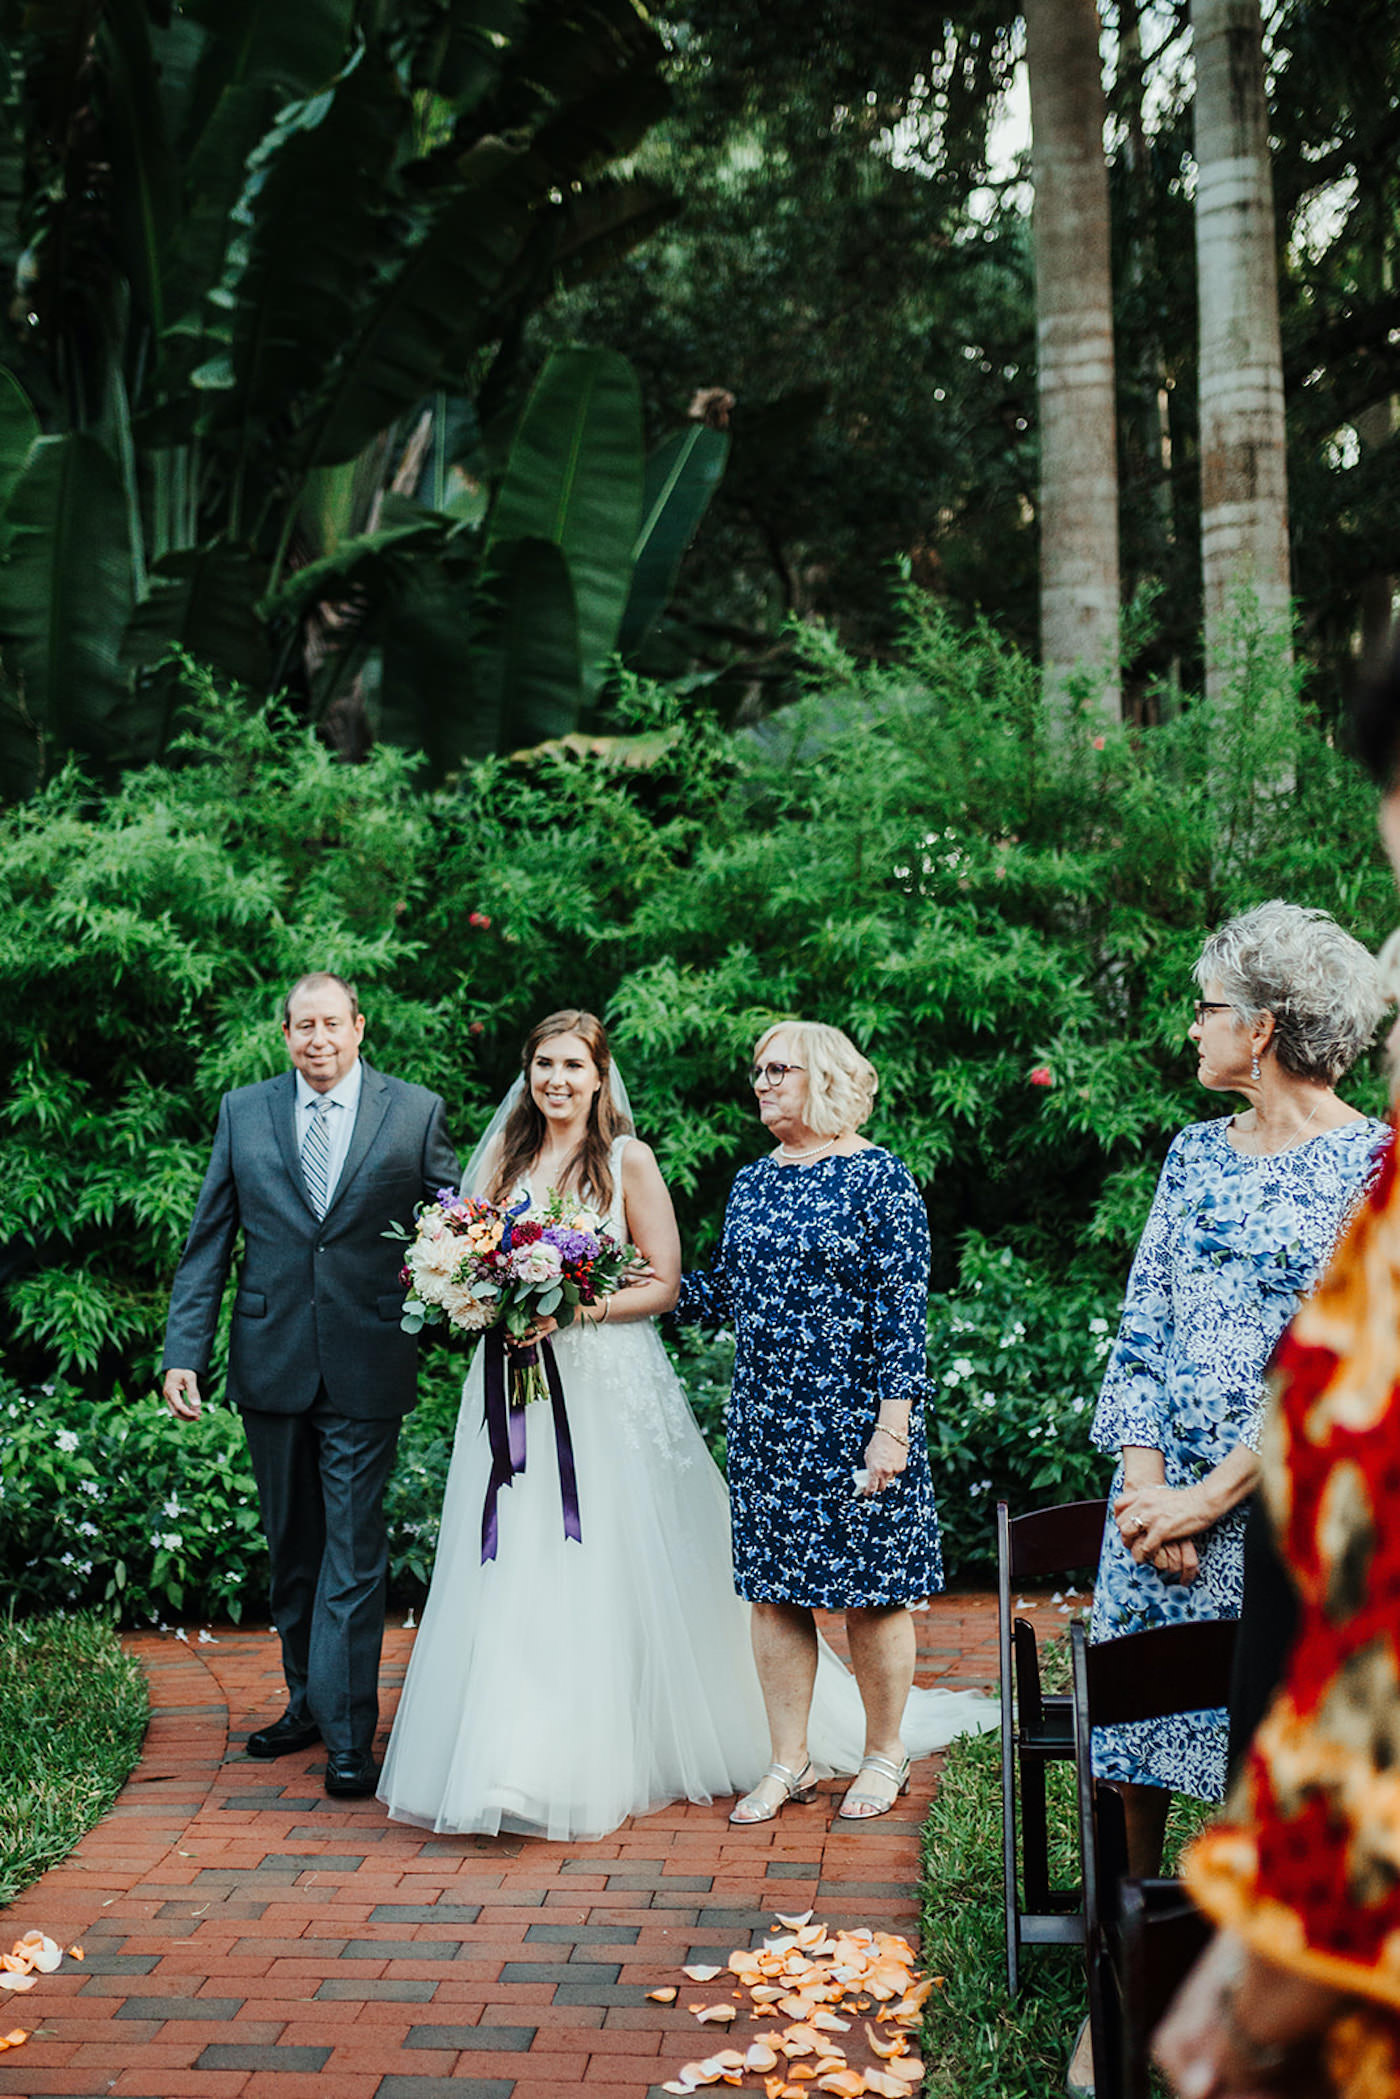 Bride Holding Colorful Floral Bridal Bouquet with Mom and Dad Walking Down the Wedding Ceremony Aisle, Processional Portrait